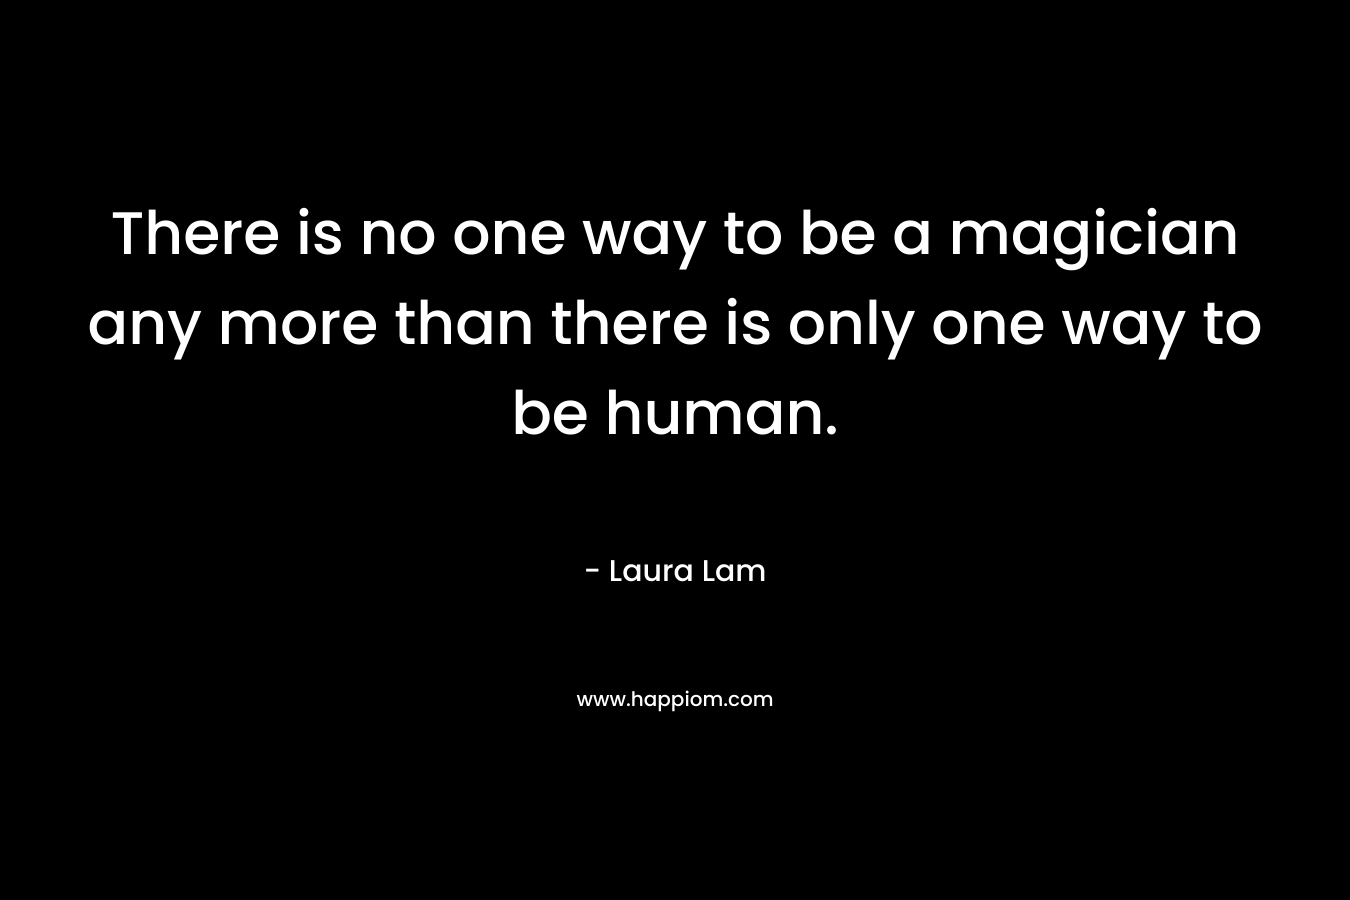 There is no one way to be a magician any more than there is only one way to be human. – Laura Lam